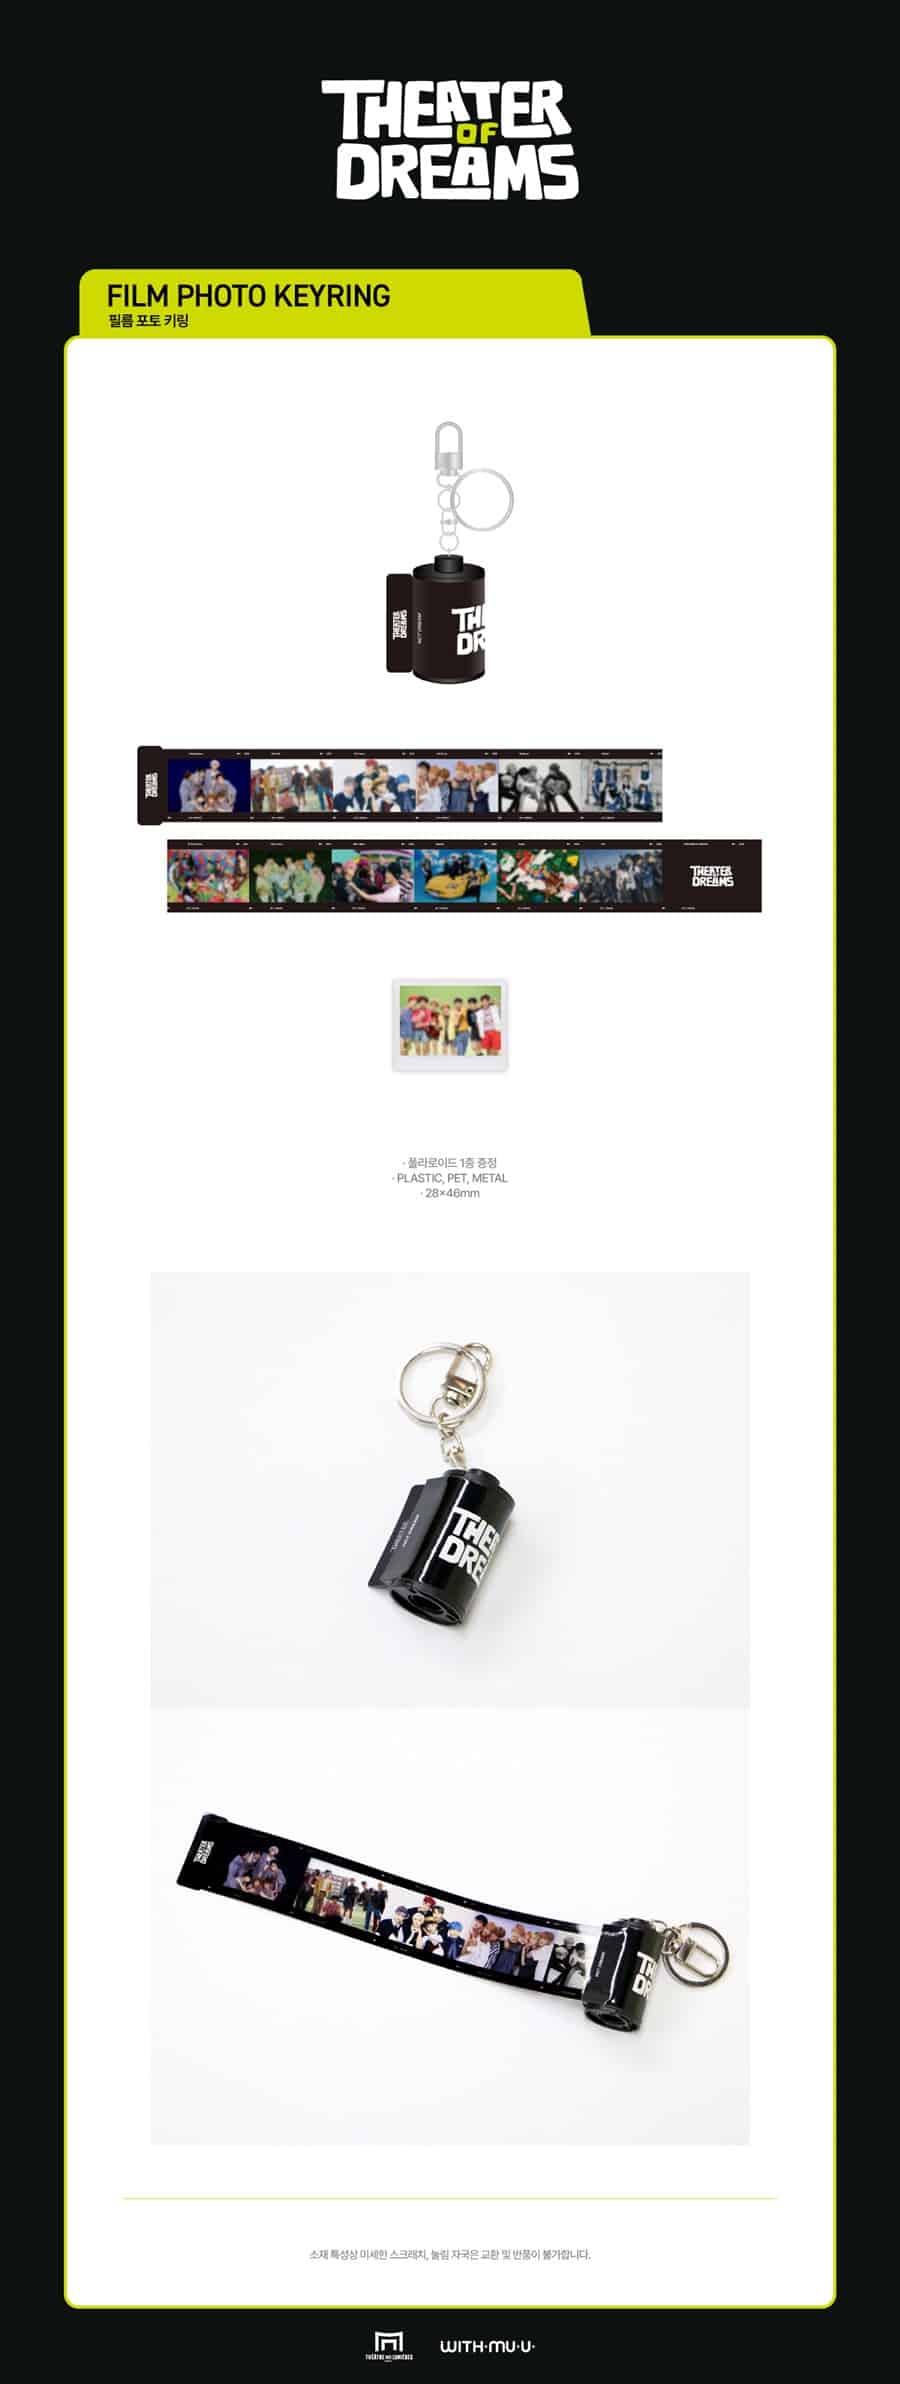 nct-dream-22-film-photo-keyring-2024-nct-dream-theater-of-dreams-official-md-wholesales